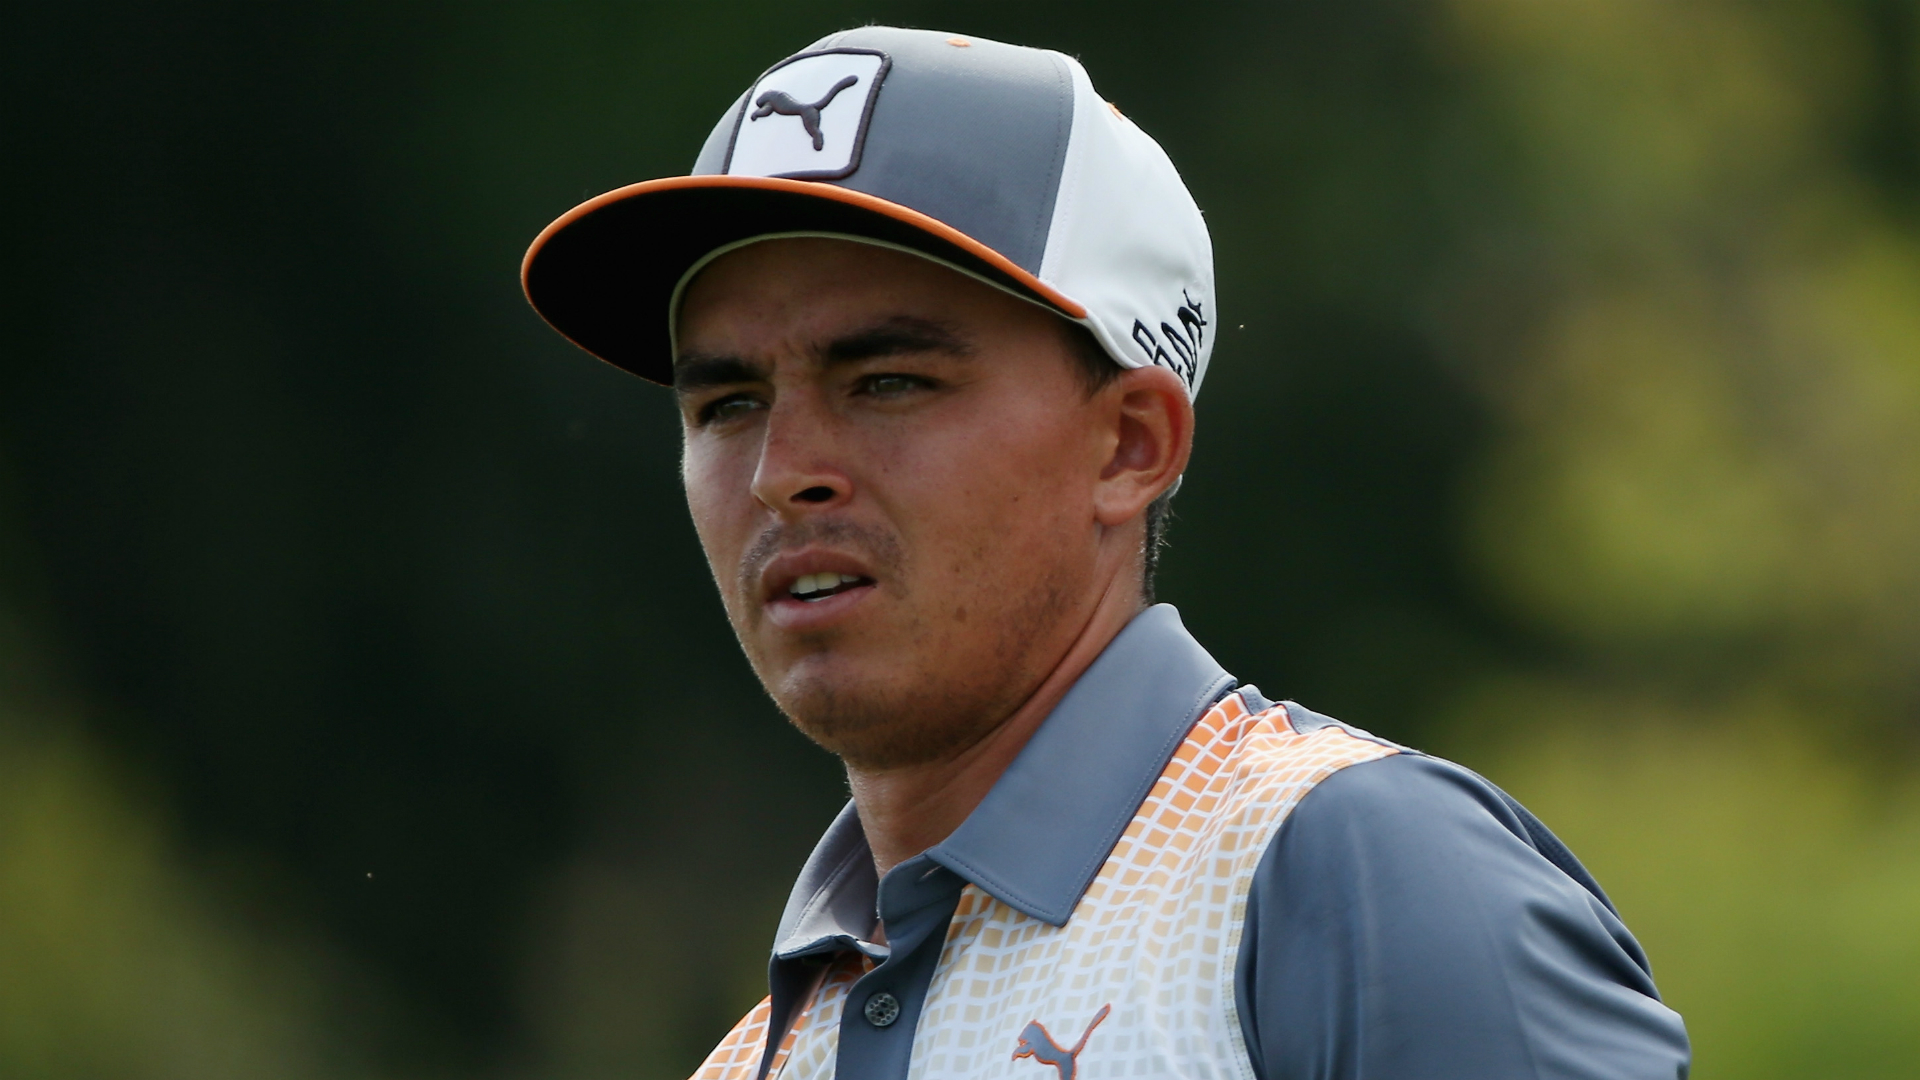 Rickie Fowler, Ian Poulter voted most overrated by peers